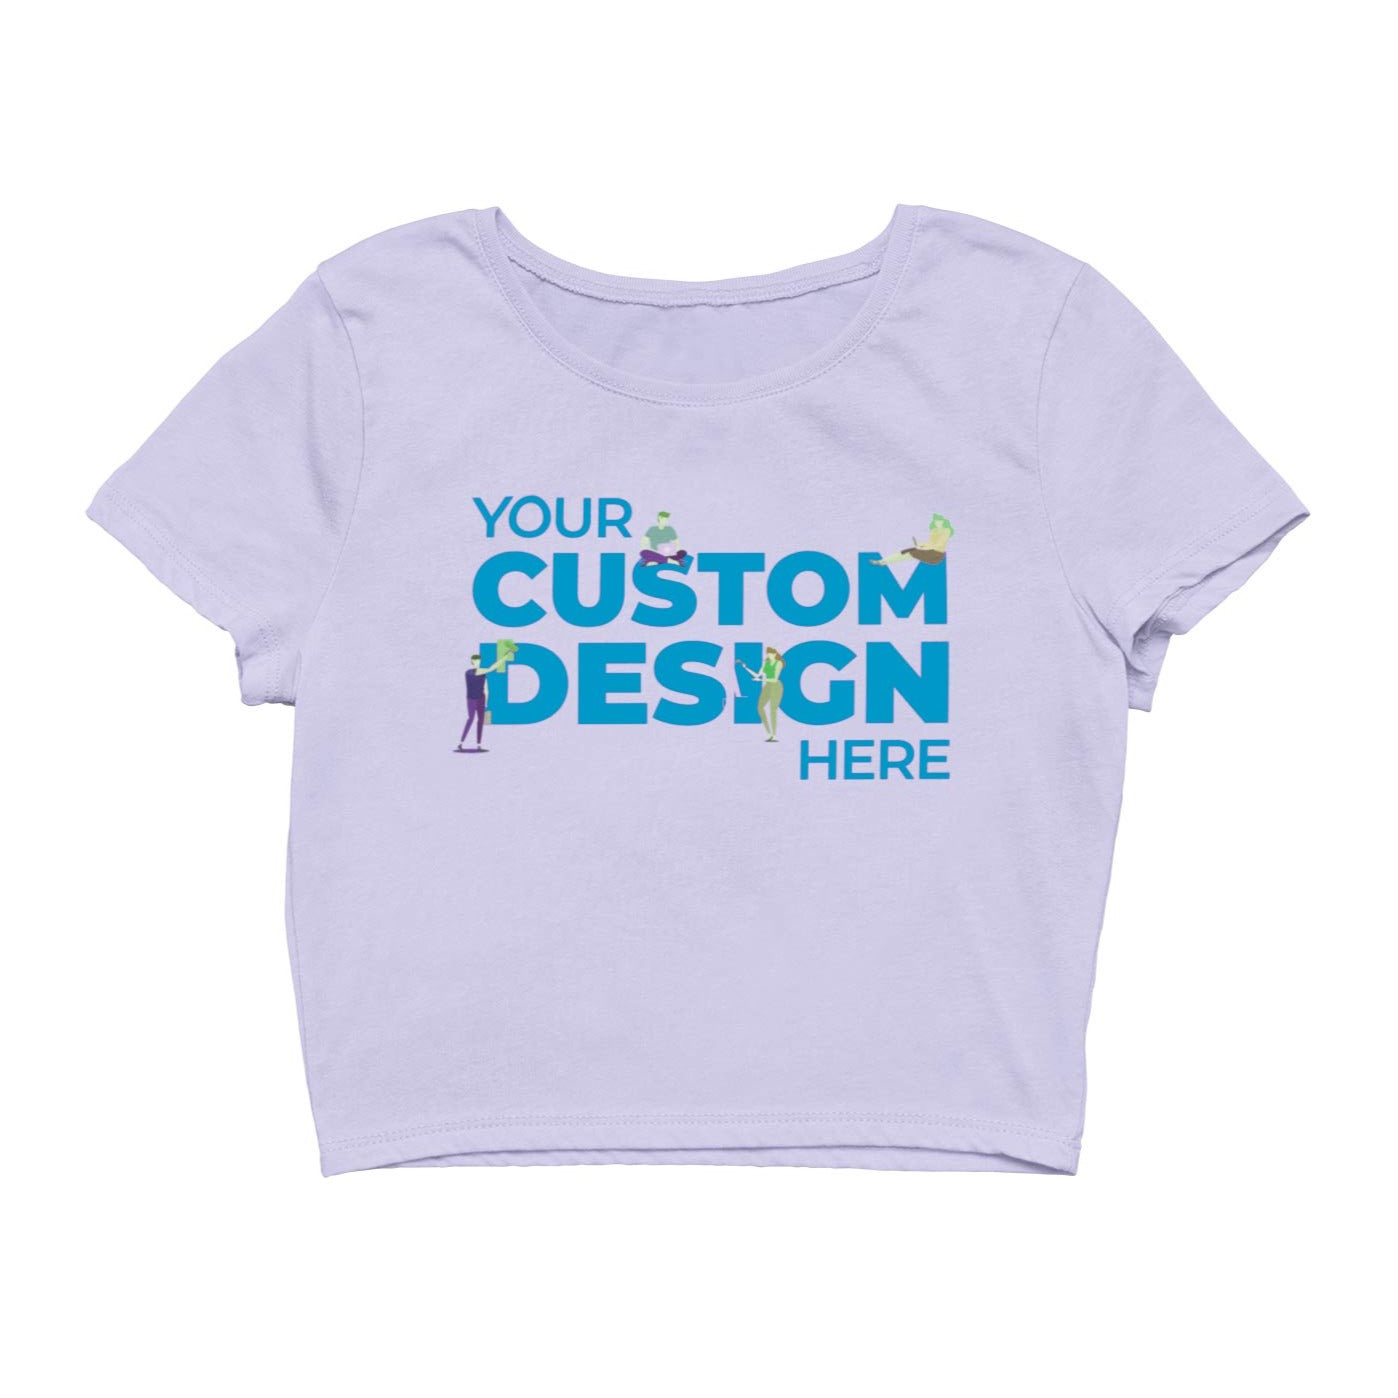 lavender custom customizable personalized your logo image crop tops by the banyan tee plain black crop top crop tops india crop tops for girls